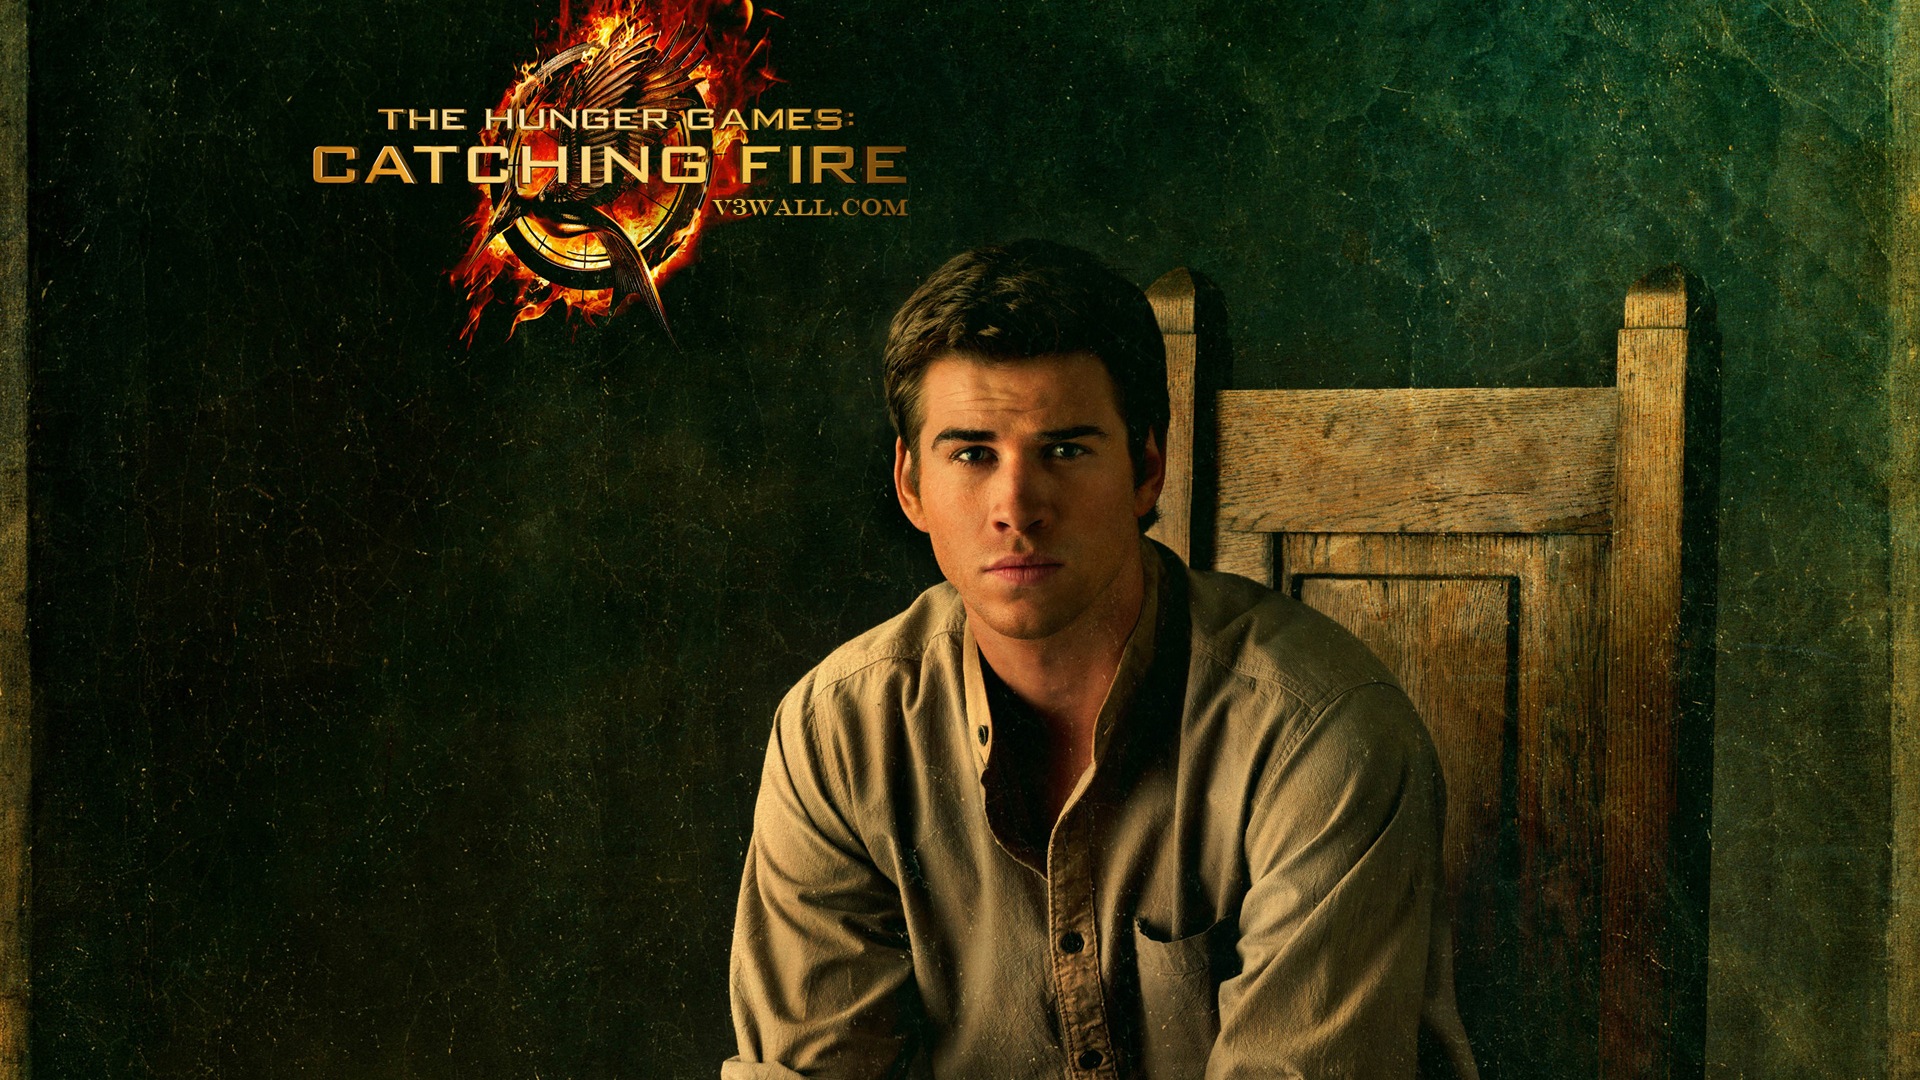 The Hunger Games: Catching Fire wallpapers HD #9 - 1920x1080